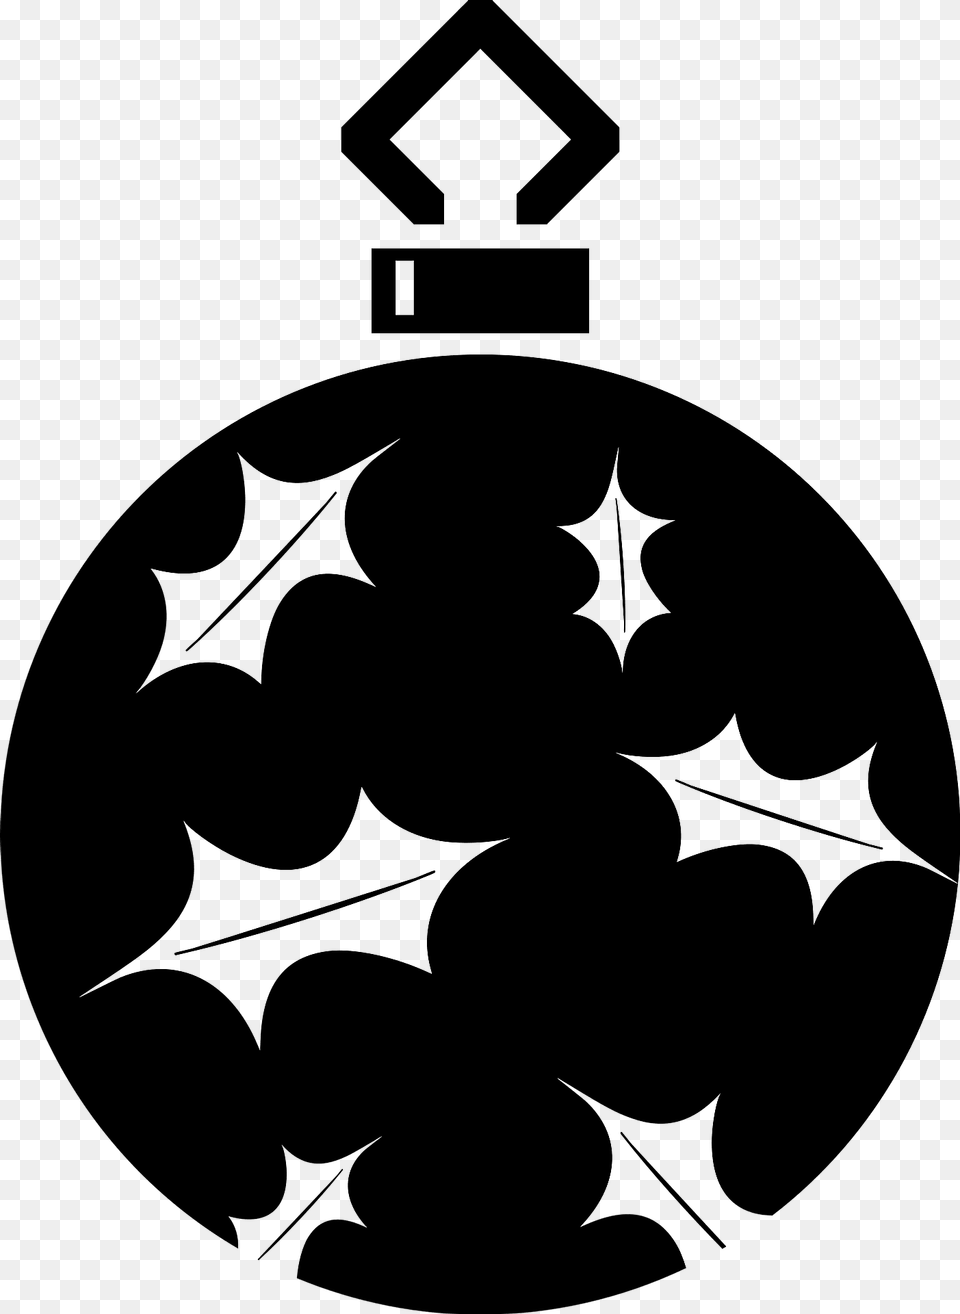 Simple Christmas Ornament Black And White With Leaf Pattern Clipart, Symbol, Logo, Accessories Png